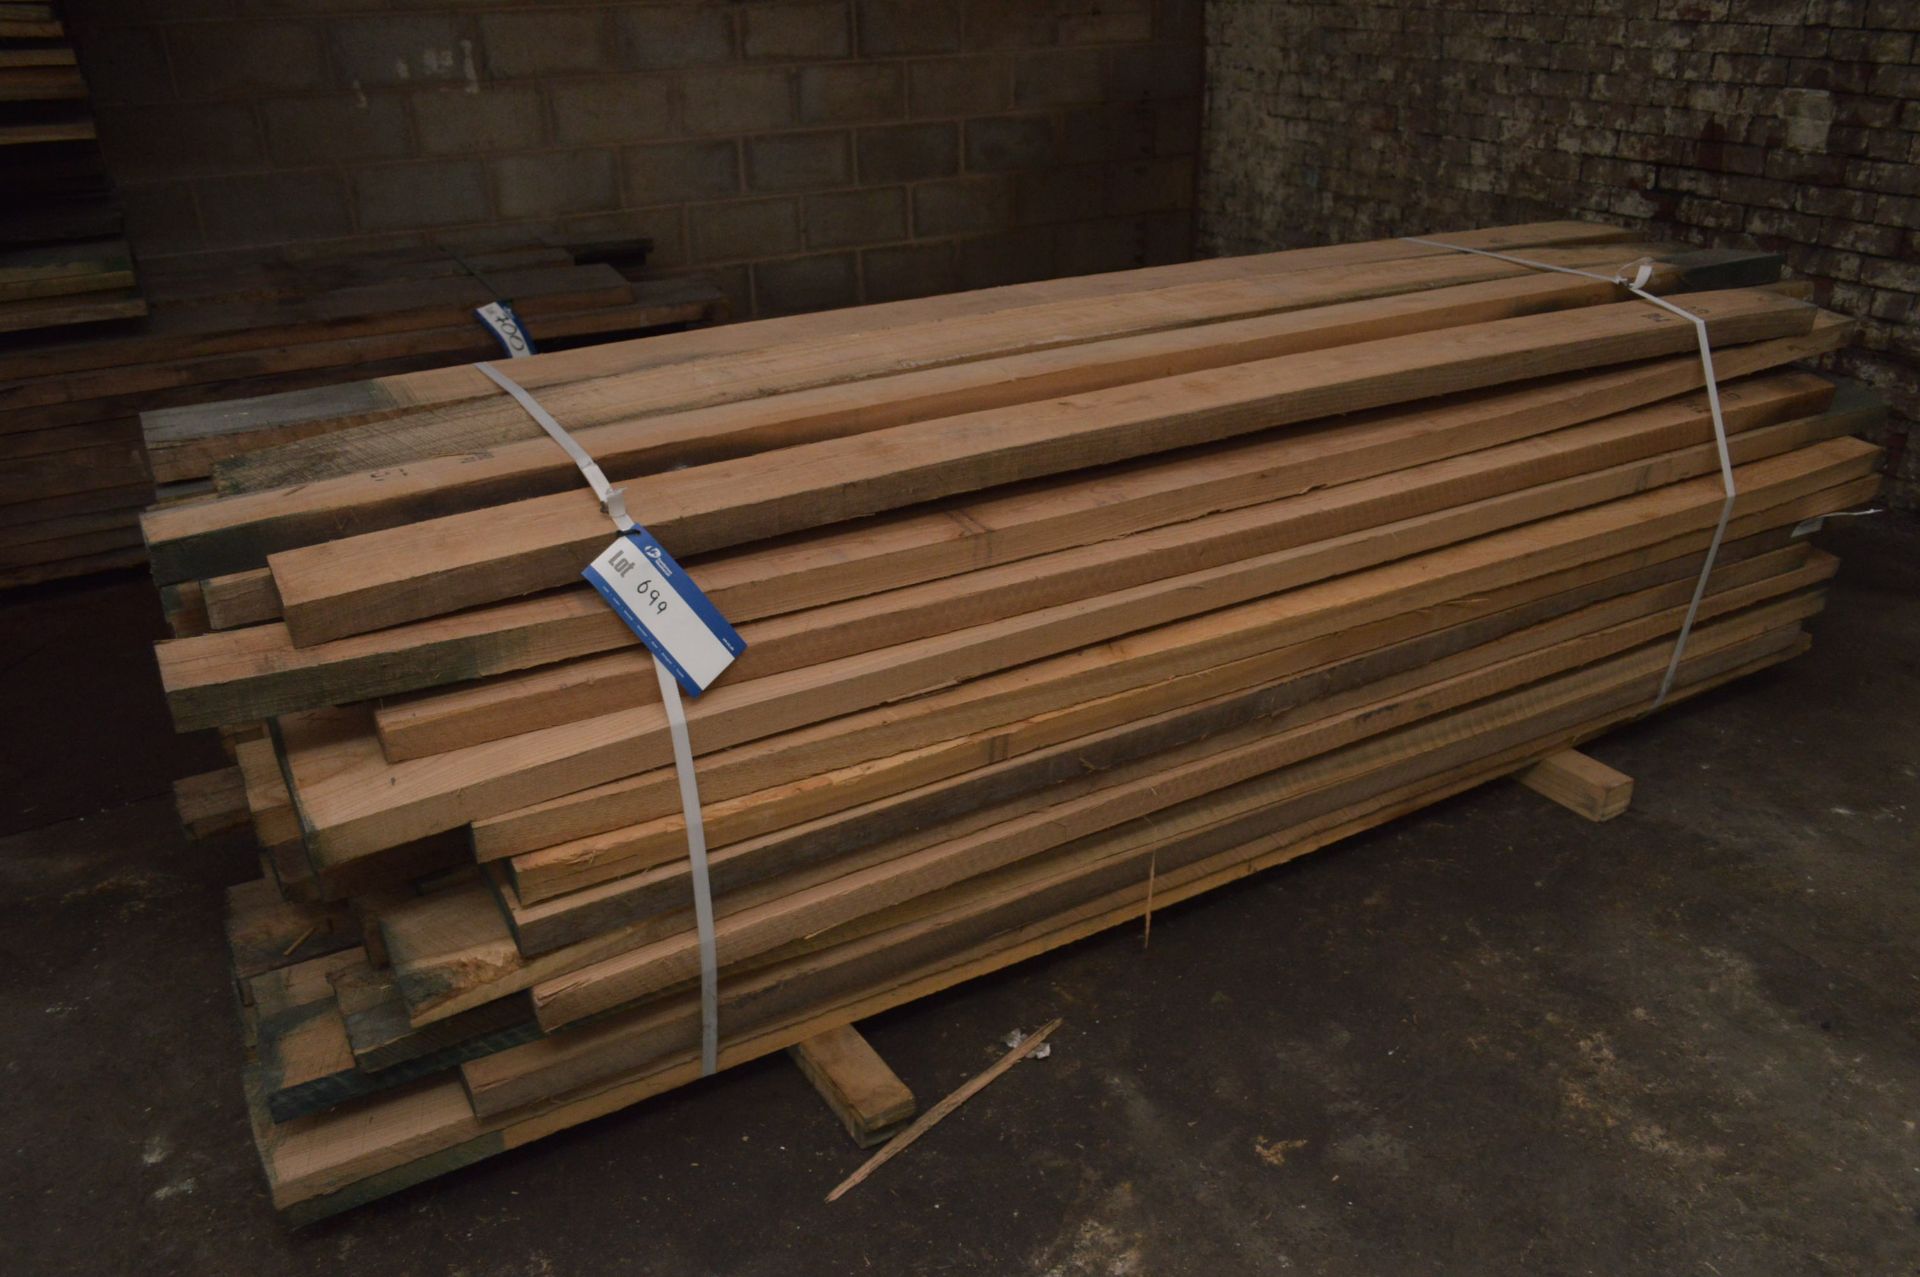 Rough Sawn Elm, (in one stack), each length from 9ft-10ft long